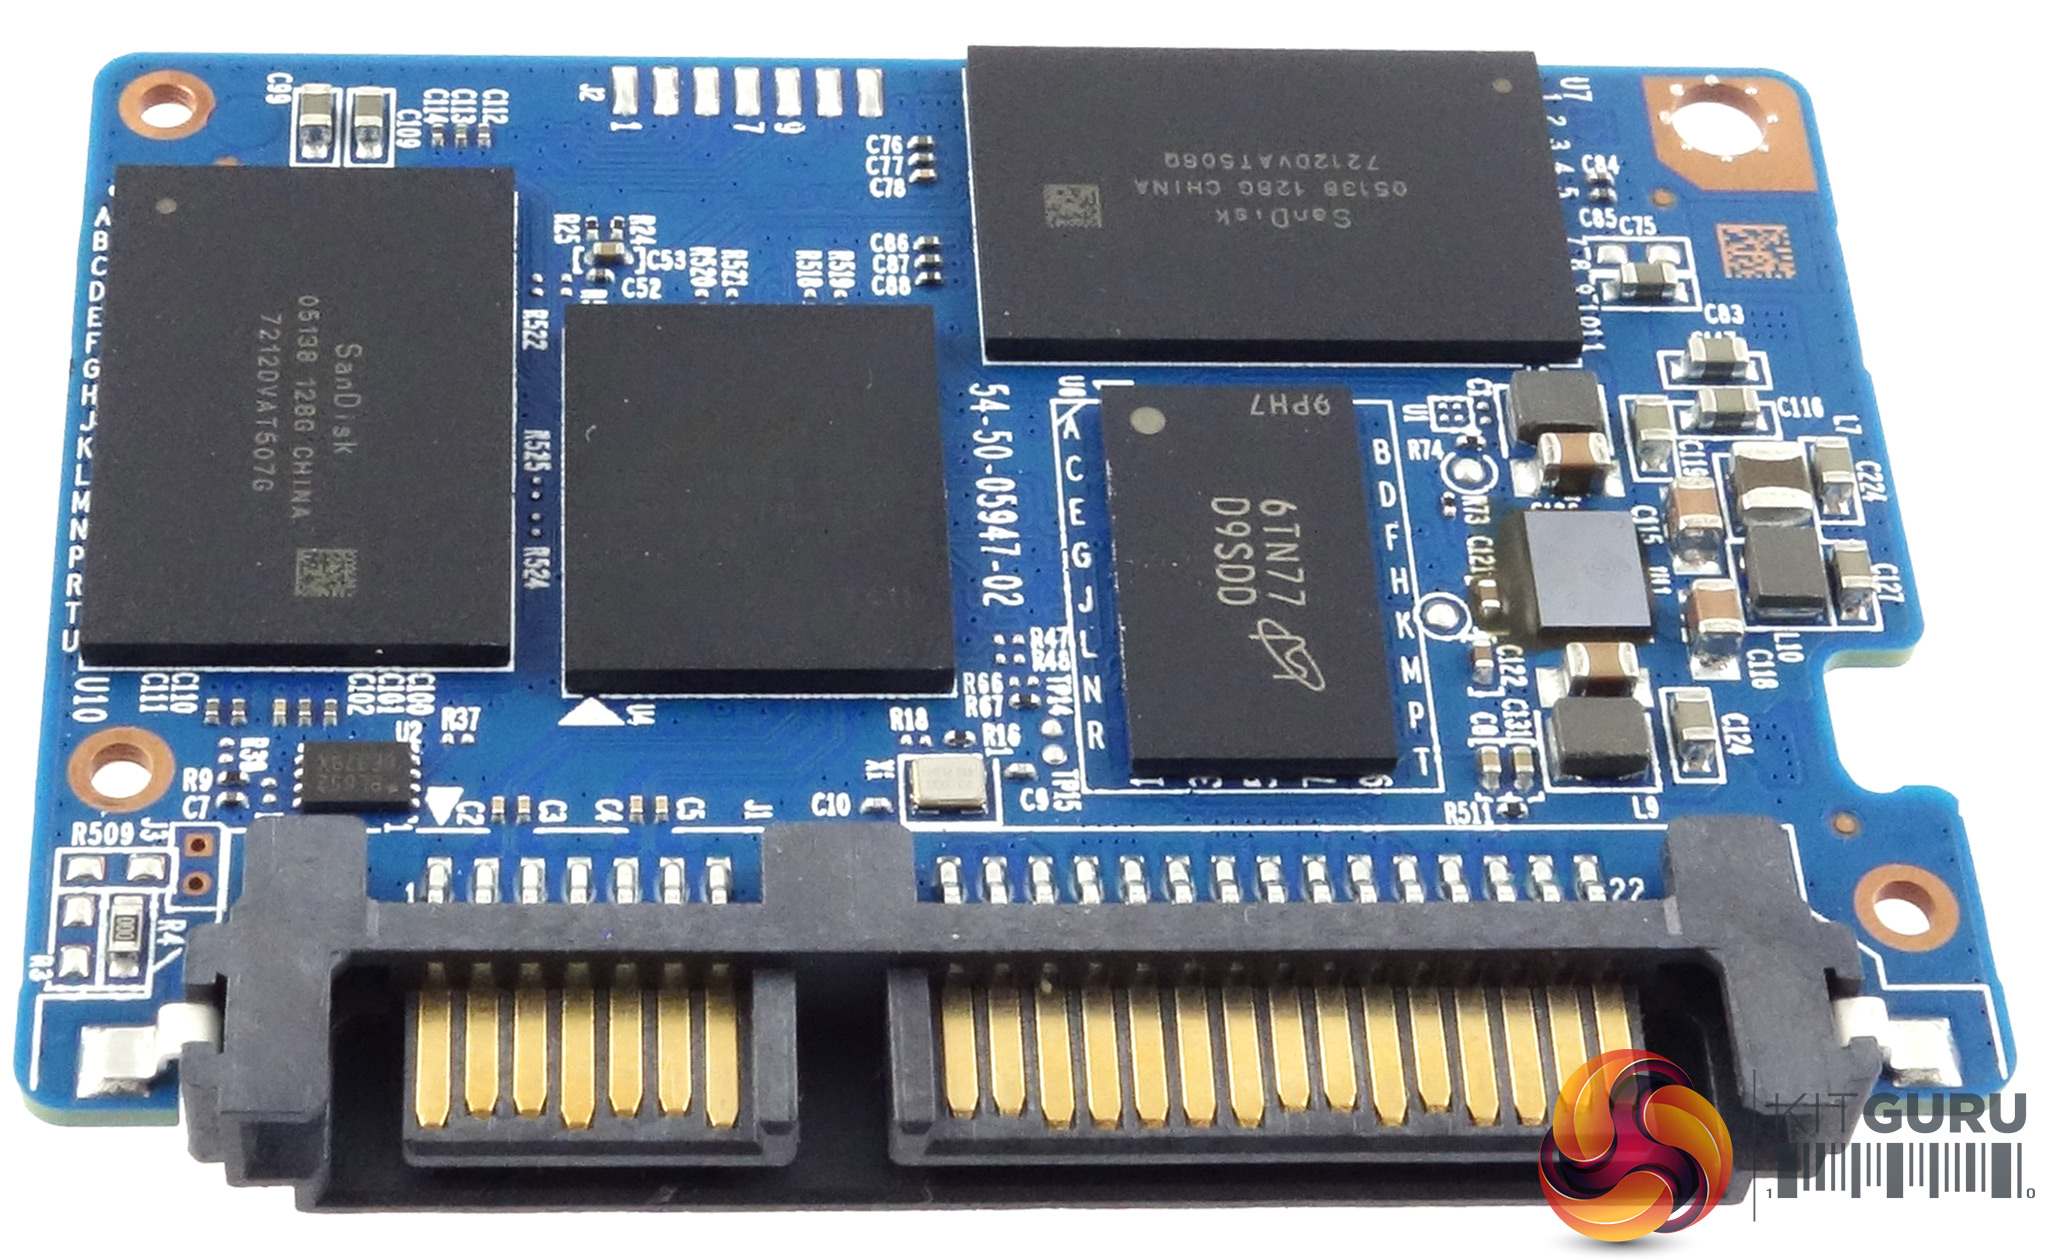 WD Blue 3D NAND 500GB SSD Review |